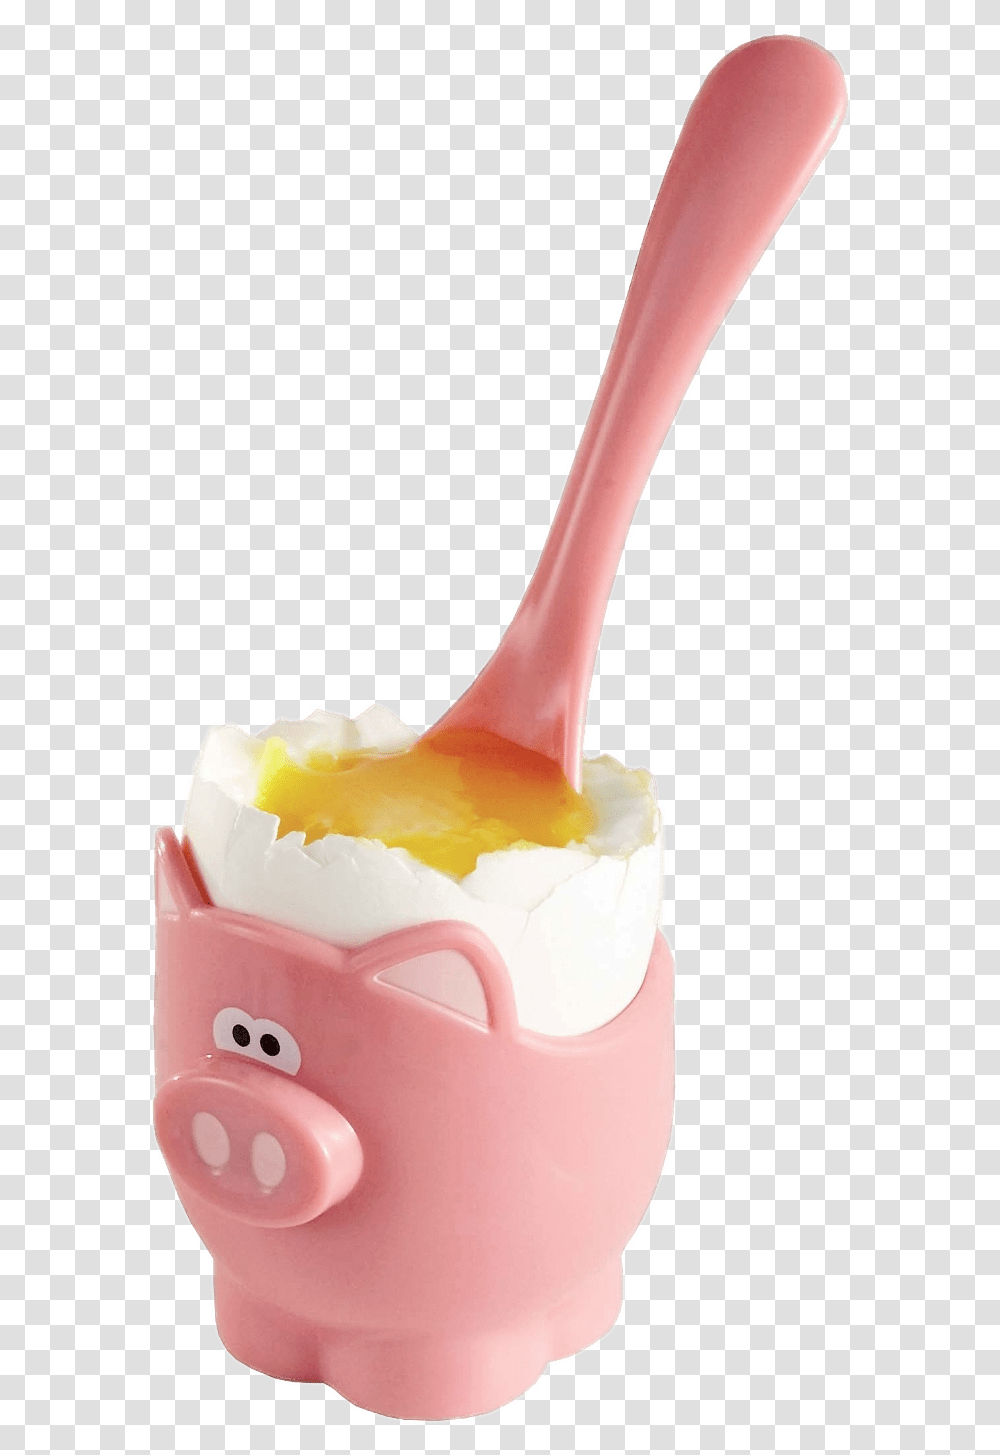 Piggy Egg Cup And Spoon Egg Cup And Spoon, Cutlery, Food, Butter, Dessert Transparent Png